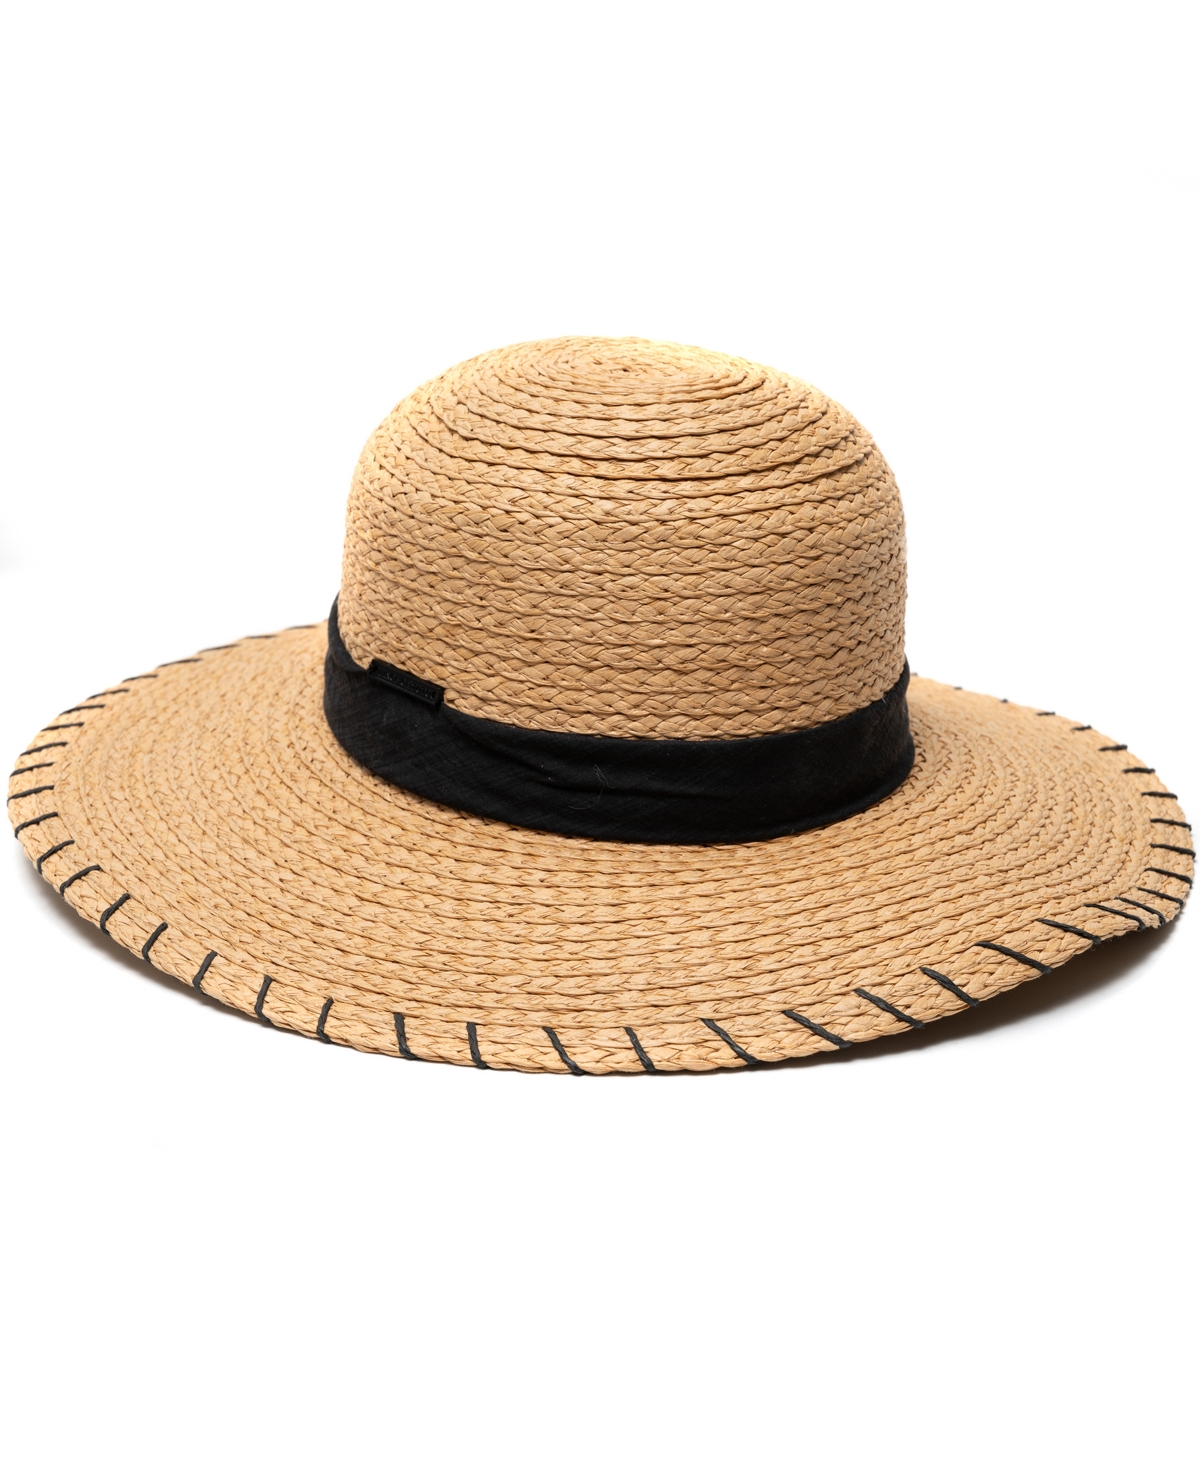 Straw Boater Hat with Whipstitch Edge - Tan